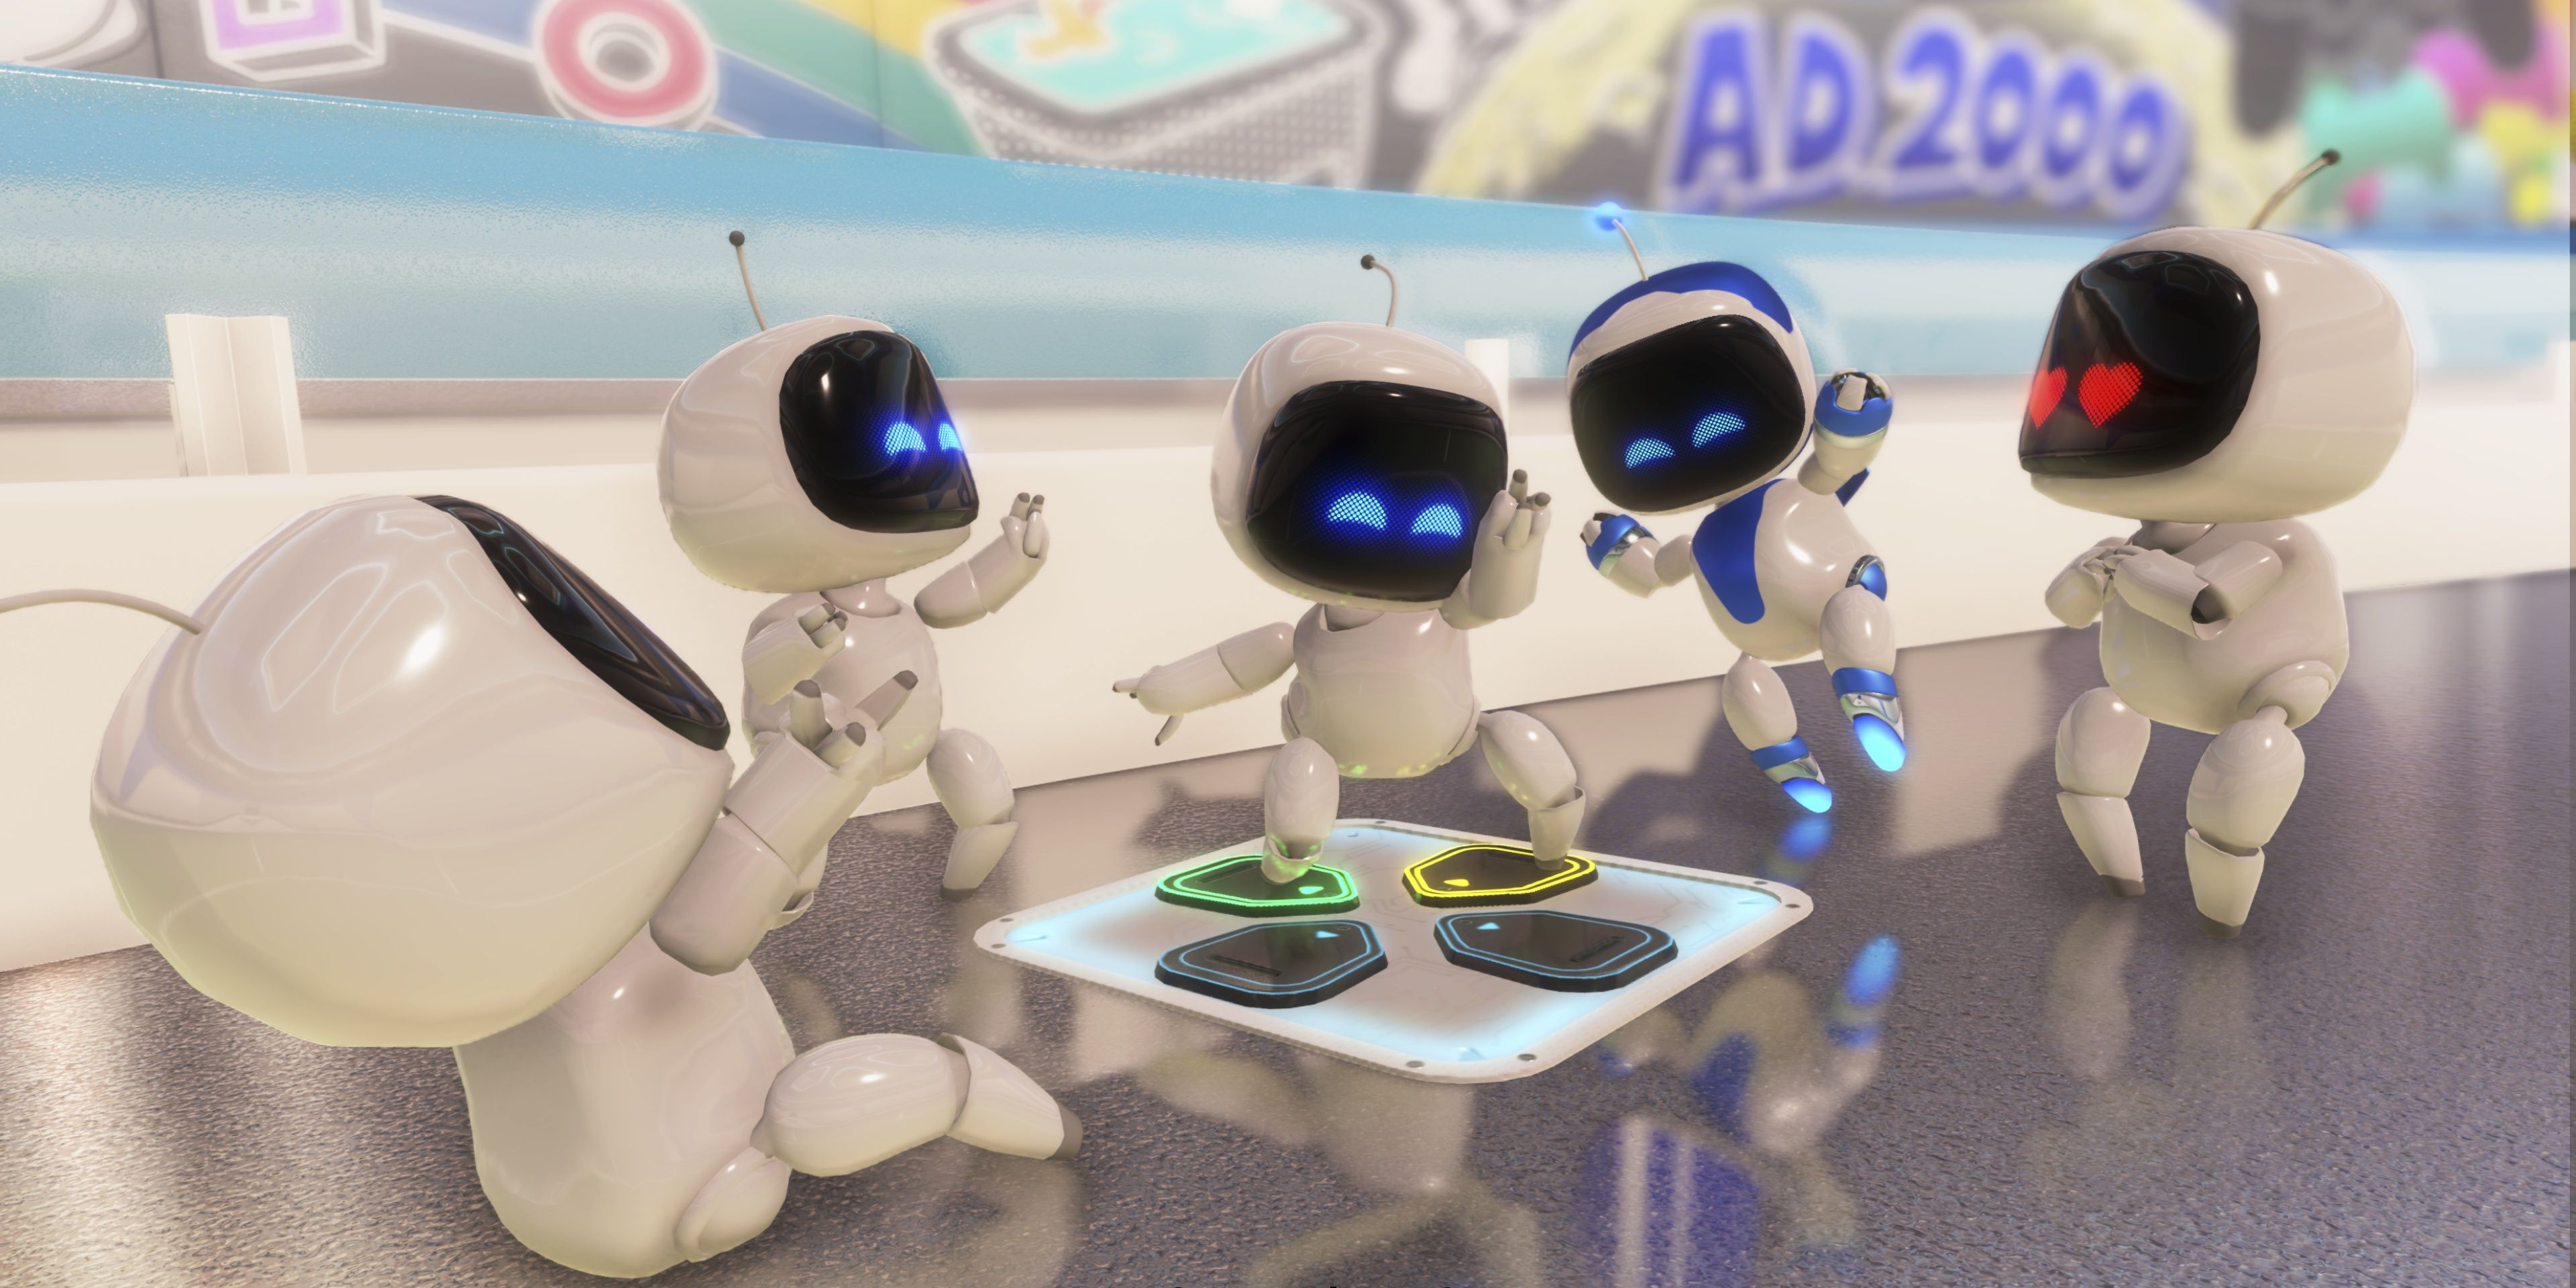 Astro Bots dancing and cheering in Astro's Playroom